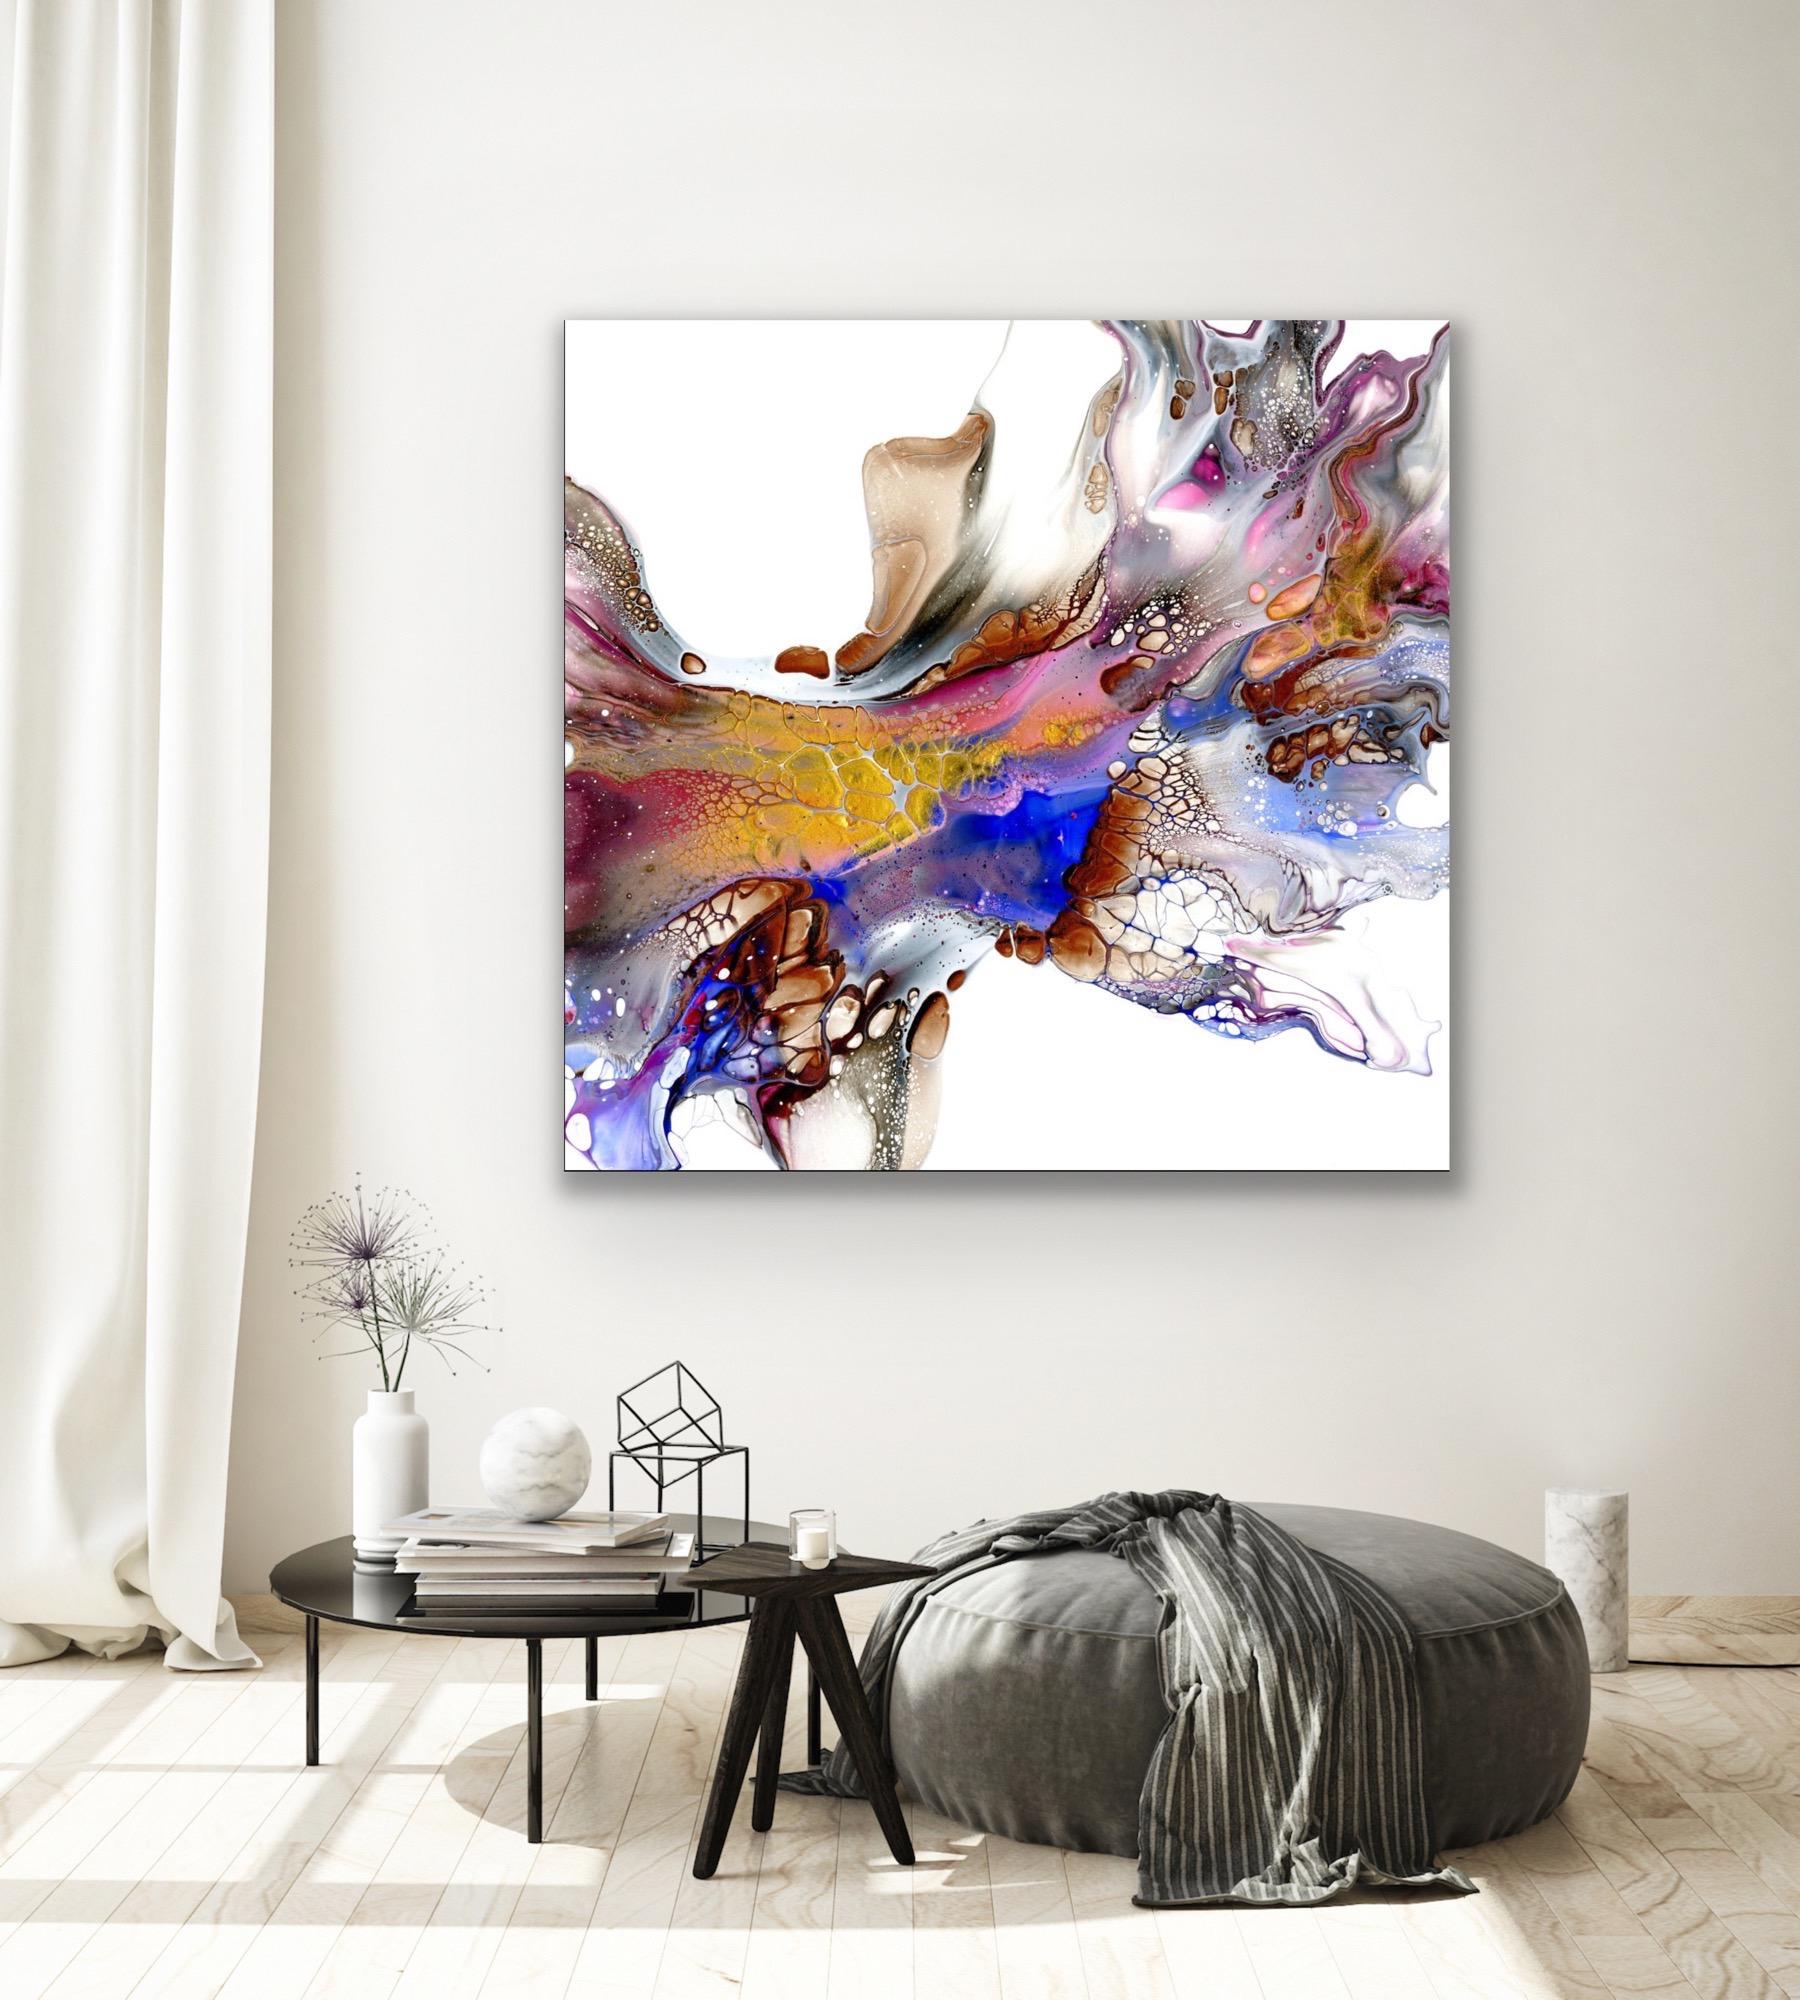 Contemporary Modern Large Indoor Outdoor Giclee Print, LE Signed by artist. - Abstract Art by Celeste Reiter